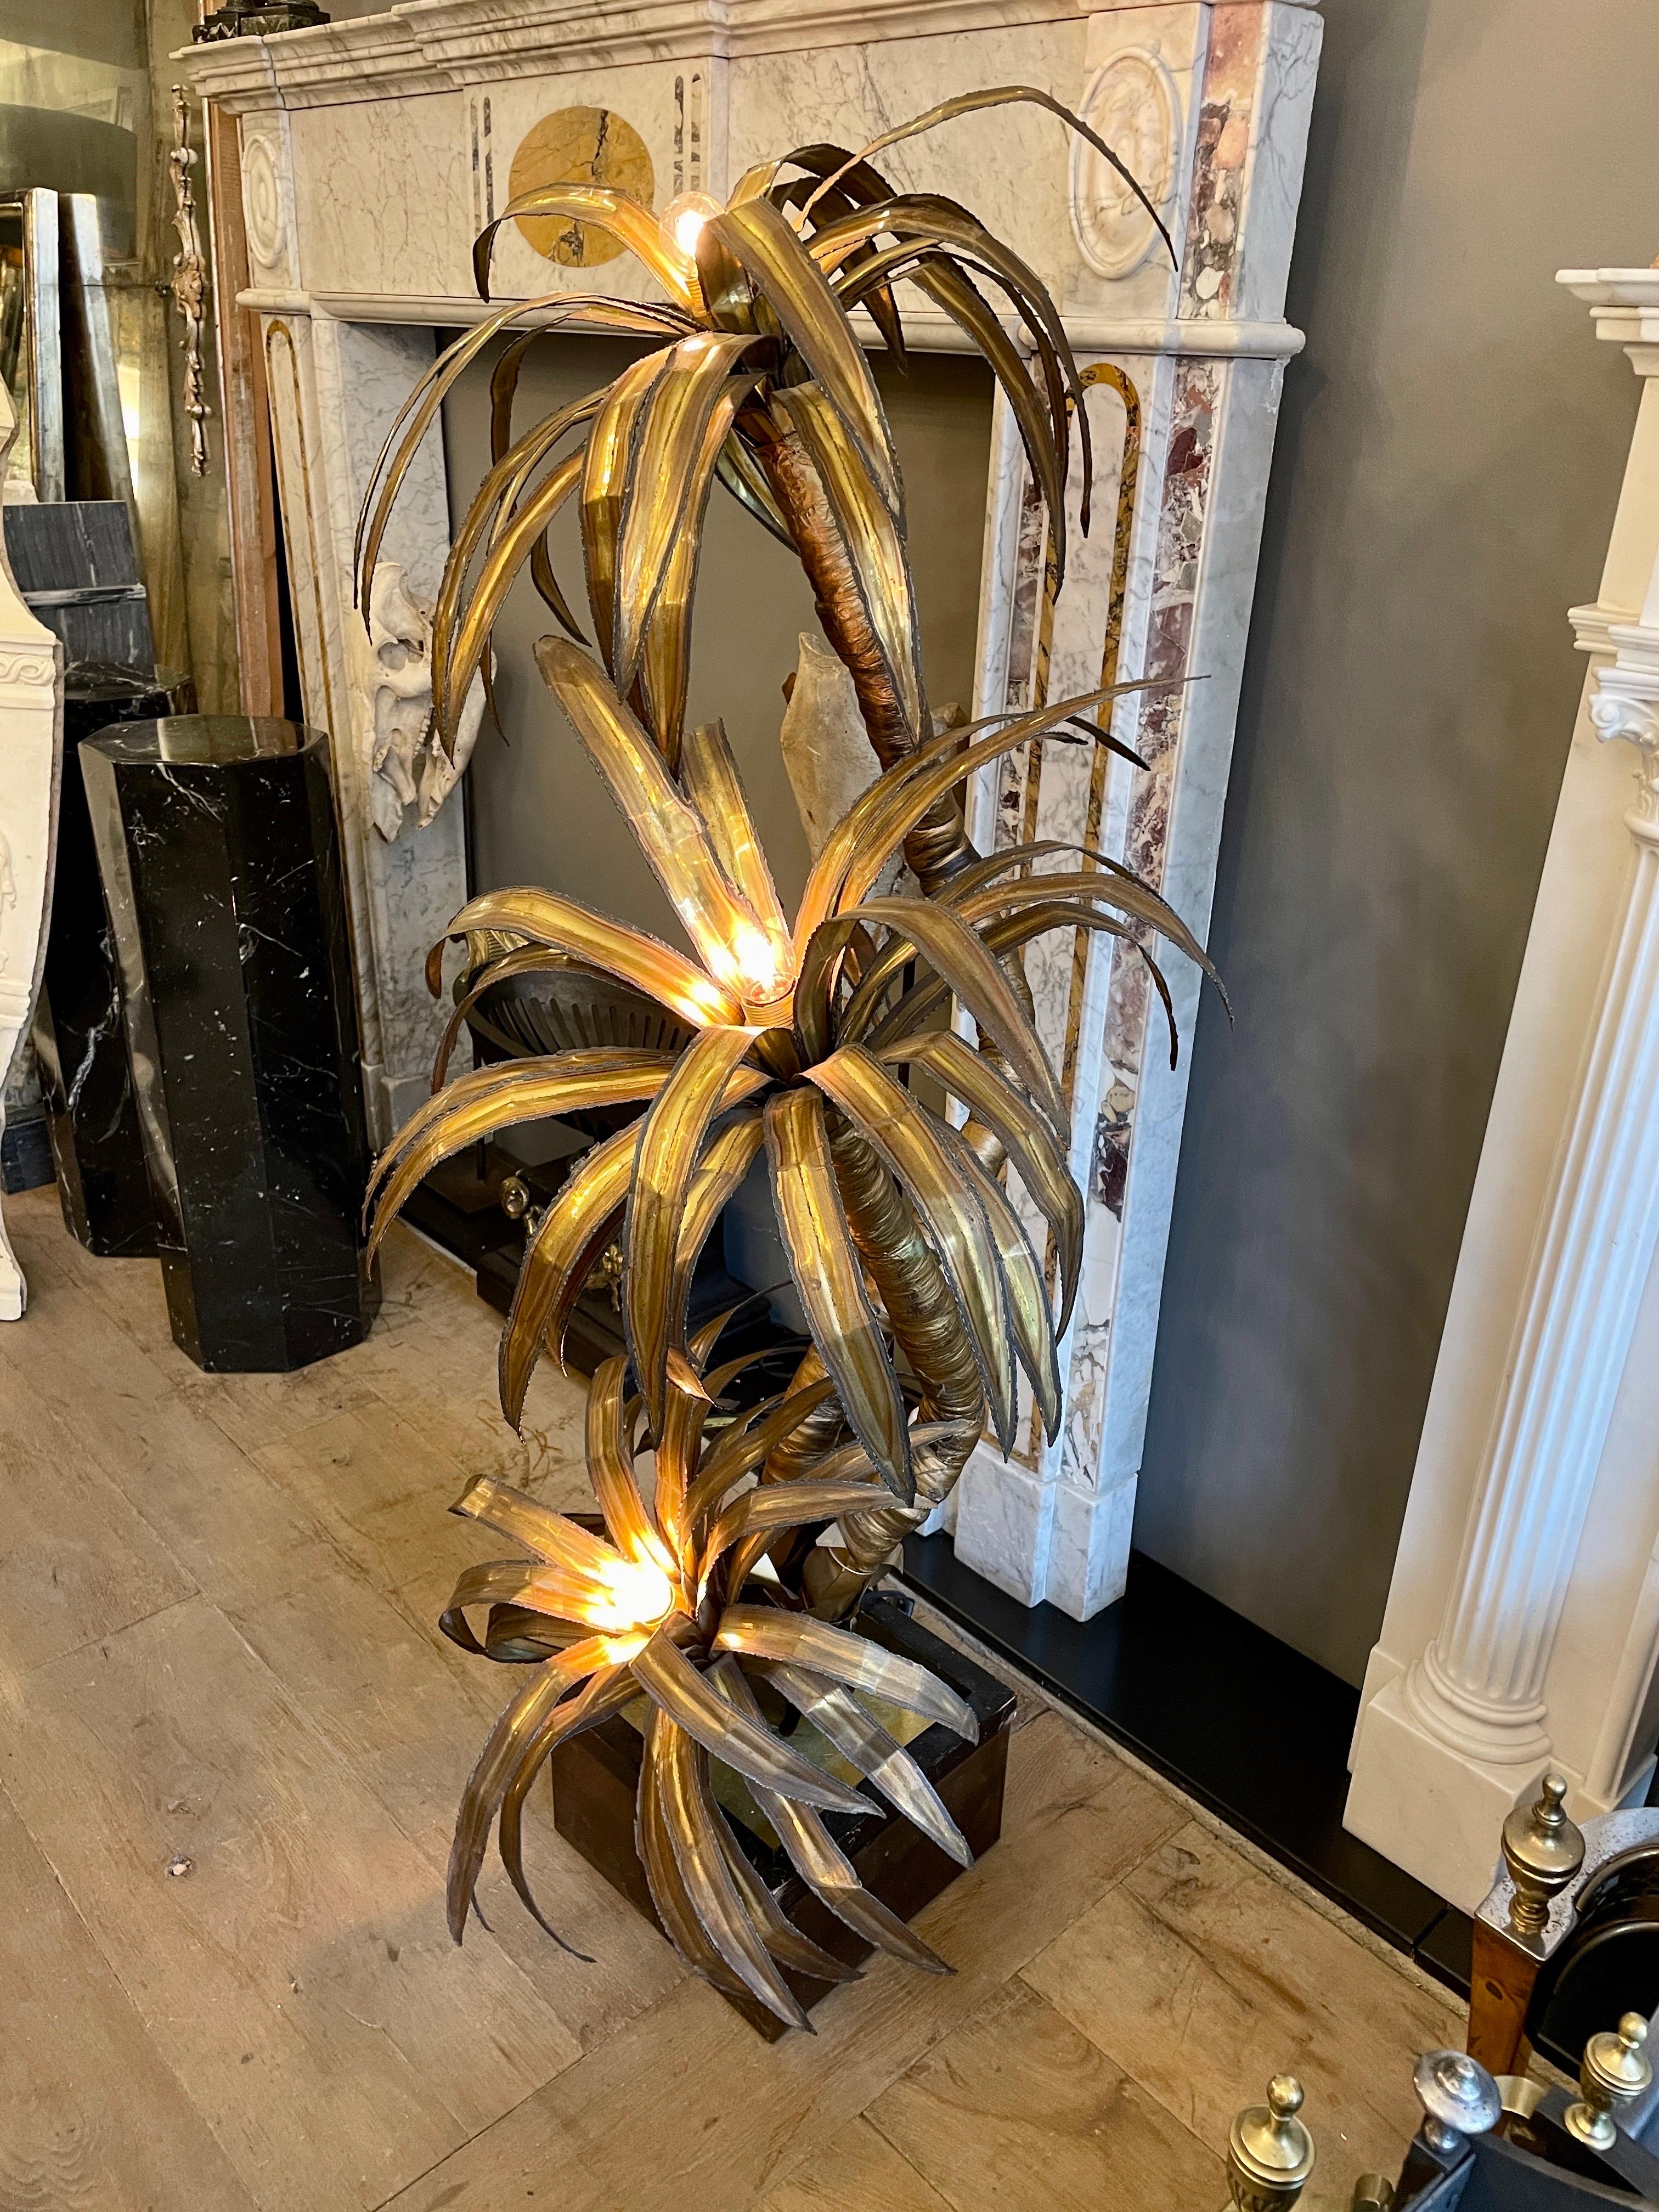 A large 3 headed palm tree floor lamp by Maison Jansen Paris.
The burnished and patinated leaves of the three heads with bulbs to centre. The stem wrapped in fabric and distressed gold finished. The burnished base with timber framed edge. An